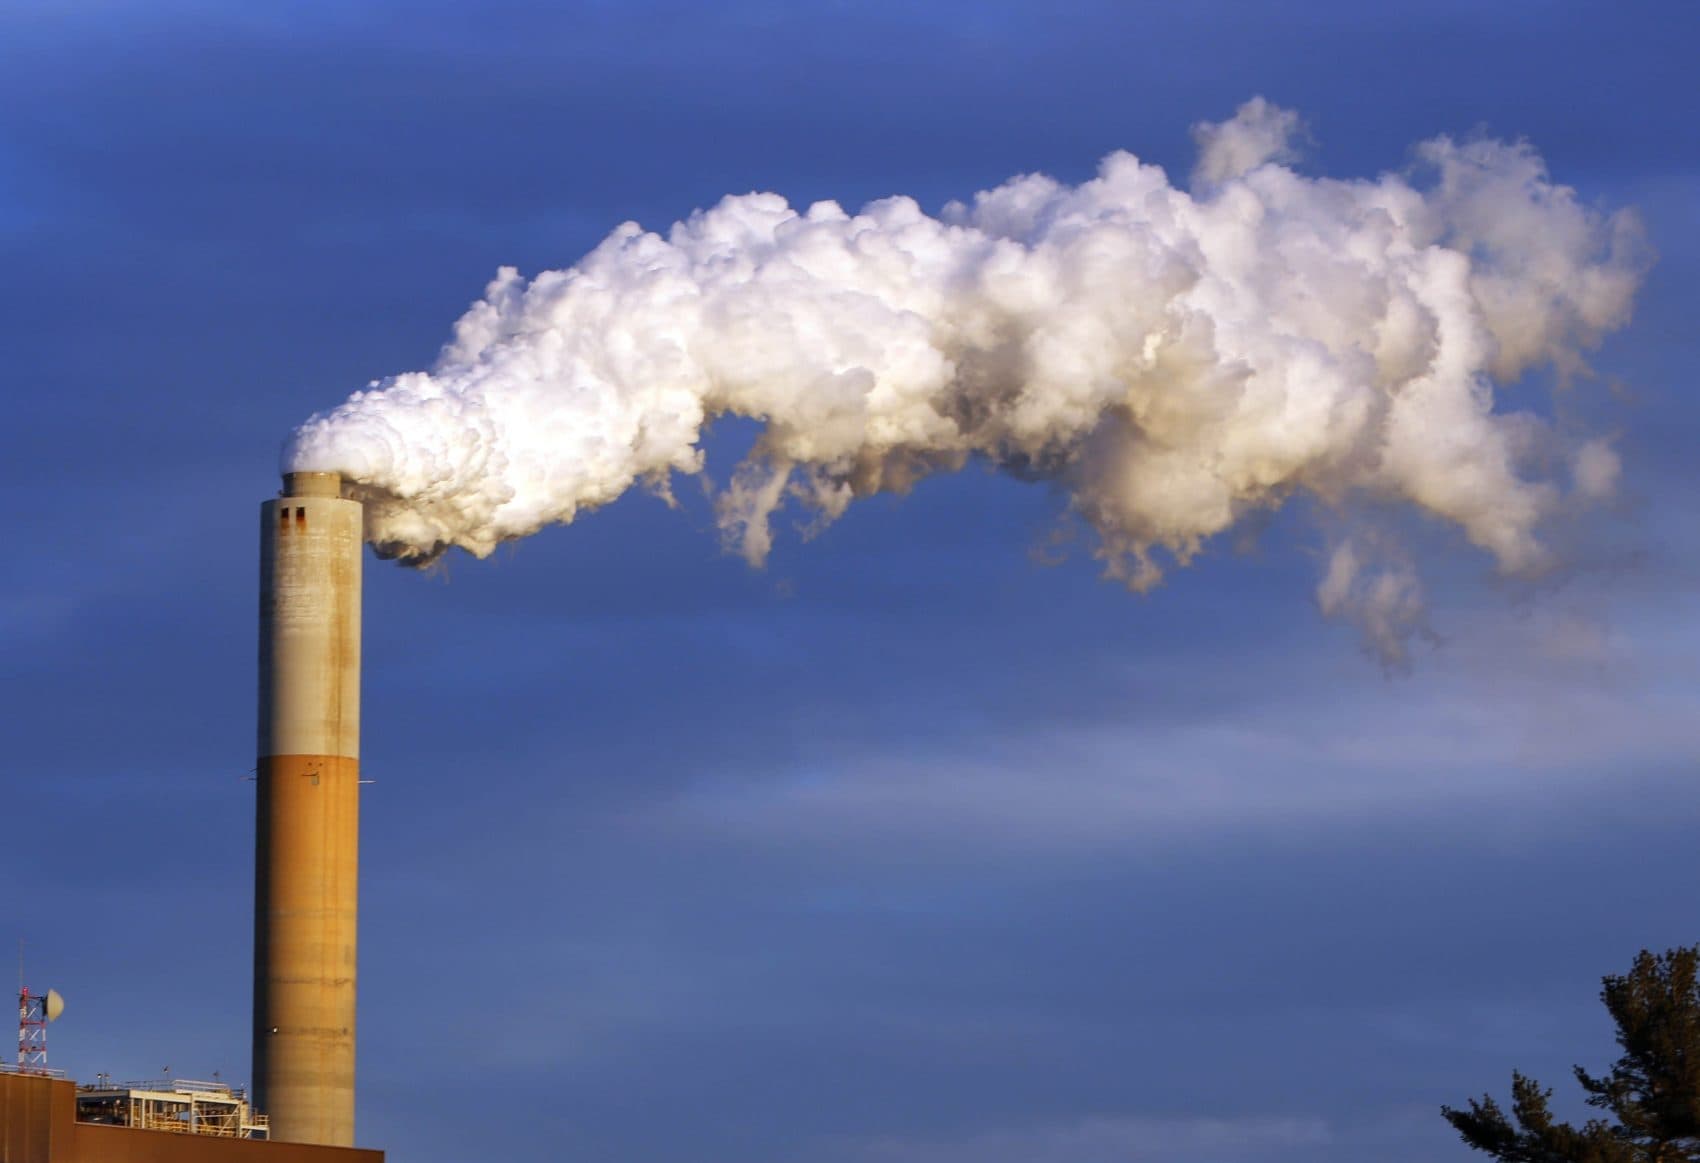 Economists overwhelmingly would vote to tax the carbon content of fuels to curtail climate change. Could the carbon tax win over the climate-change-denying troglodytes in the GOP? Pictured: In this Jan. 20, 2015 file photo, steam billows from the chimney of a coal-fired Merrimack Station in Bow, N.H. (Jim Cole/AP)